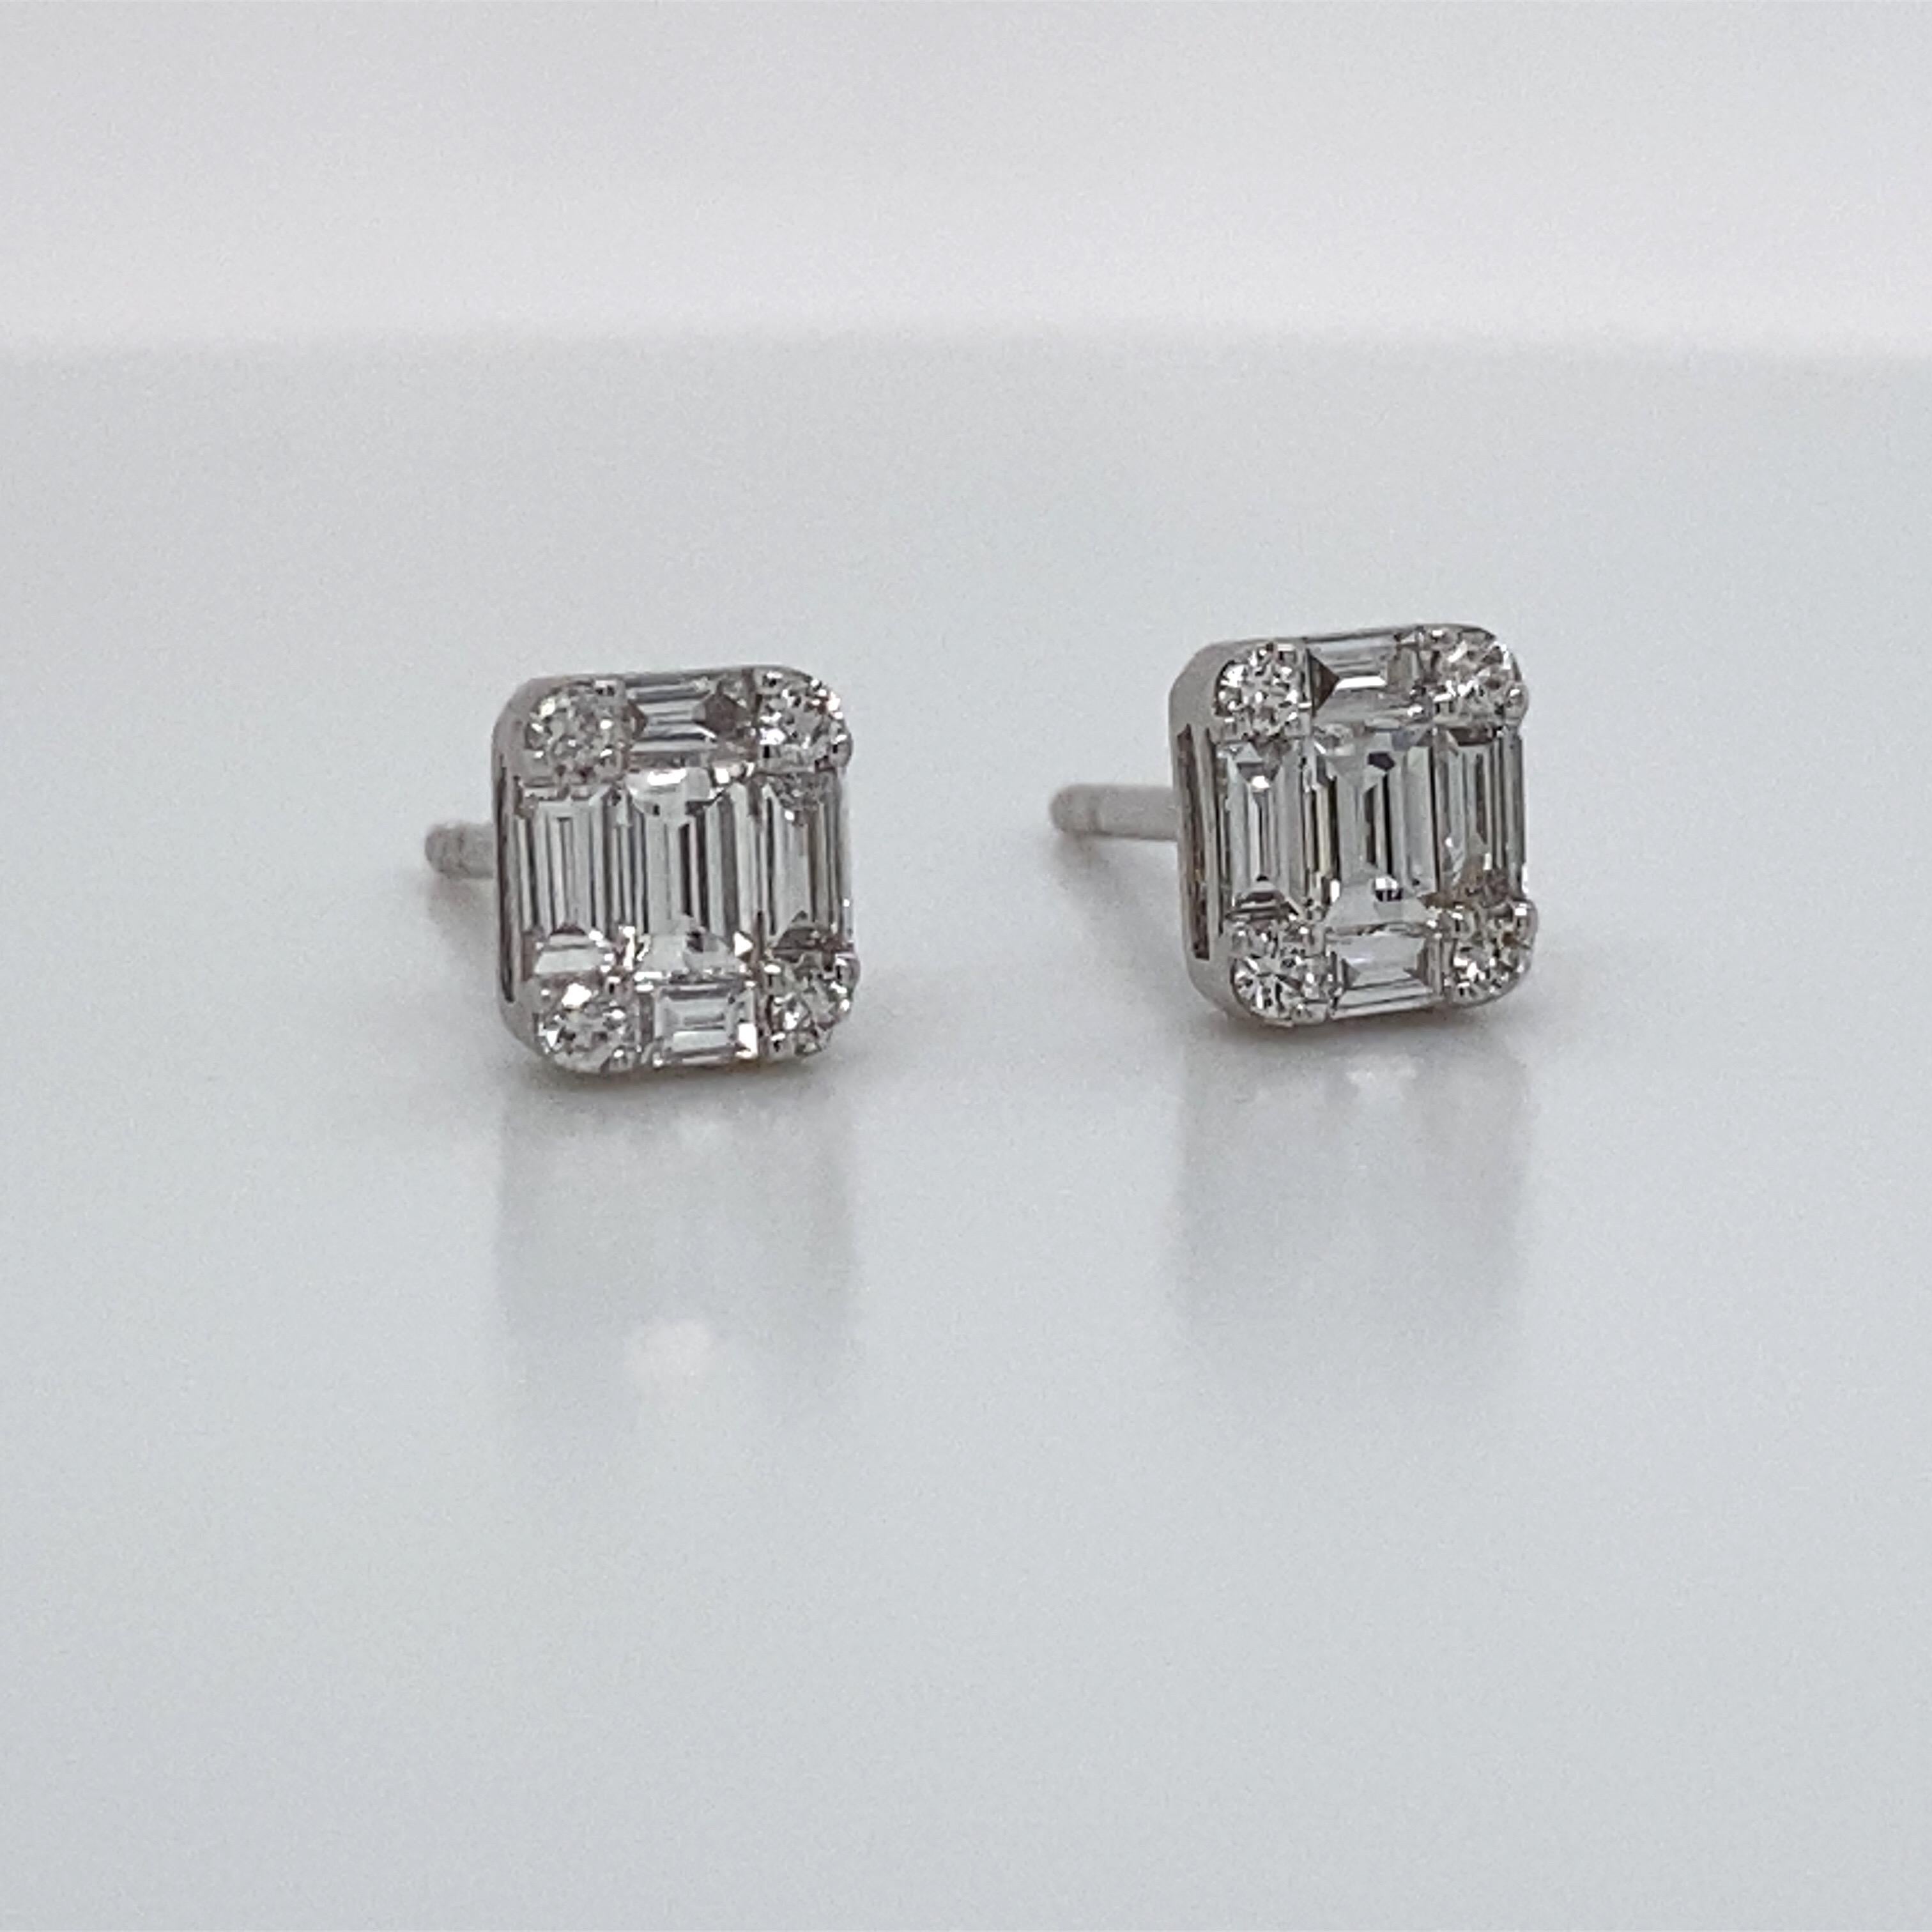 18K White gold stud earrings featuring 10 baguettes weighing 0.55 carats and 8 round brilliants weighing 0.09 carats.
Color G-H
Clarity SI